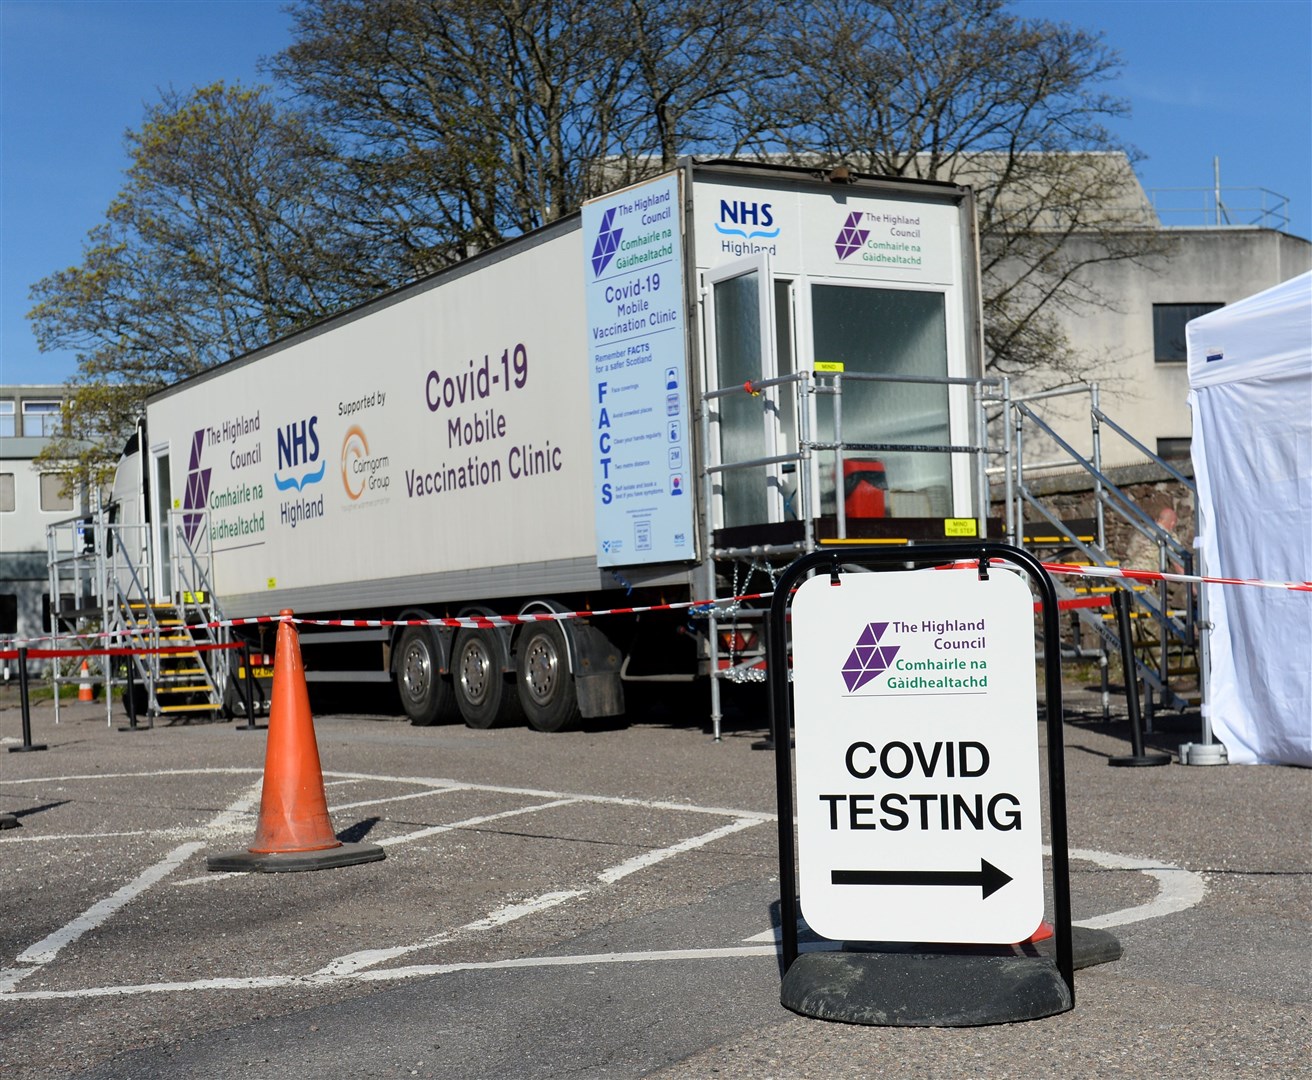 Mobile testing units have been operating across the region.